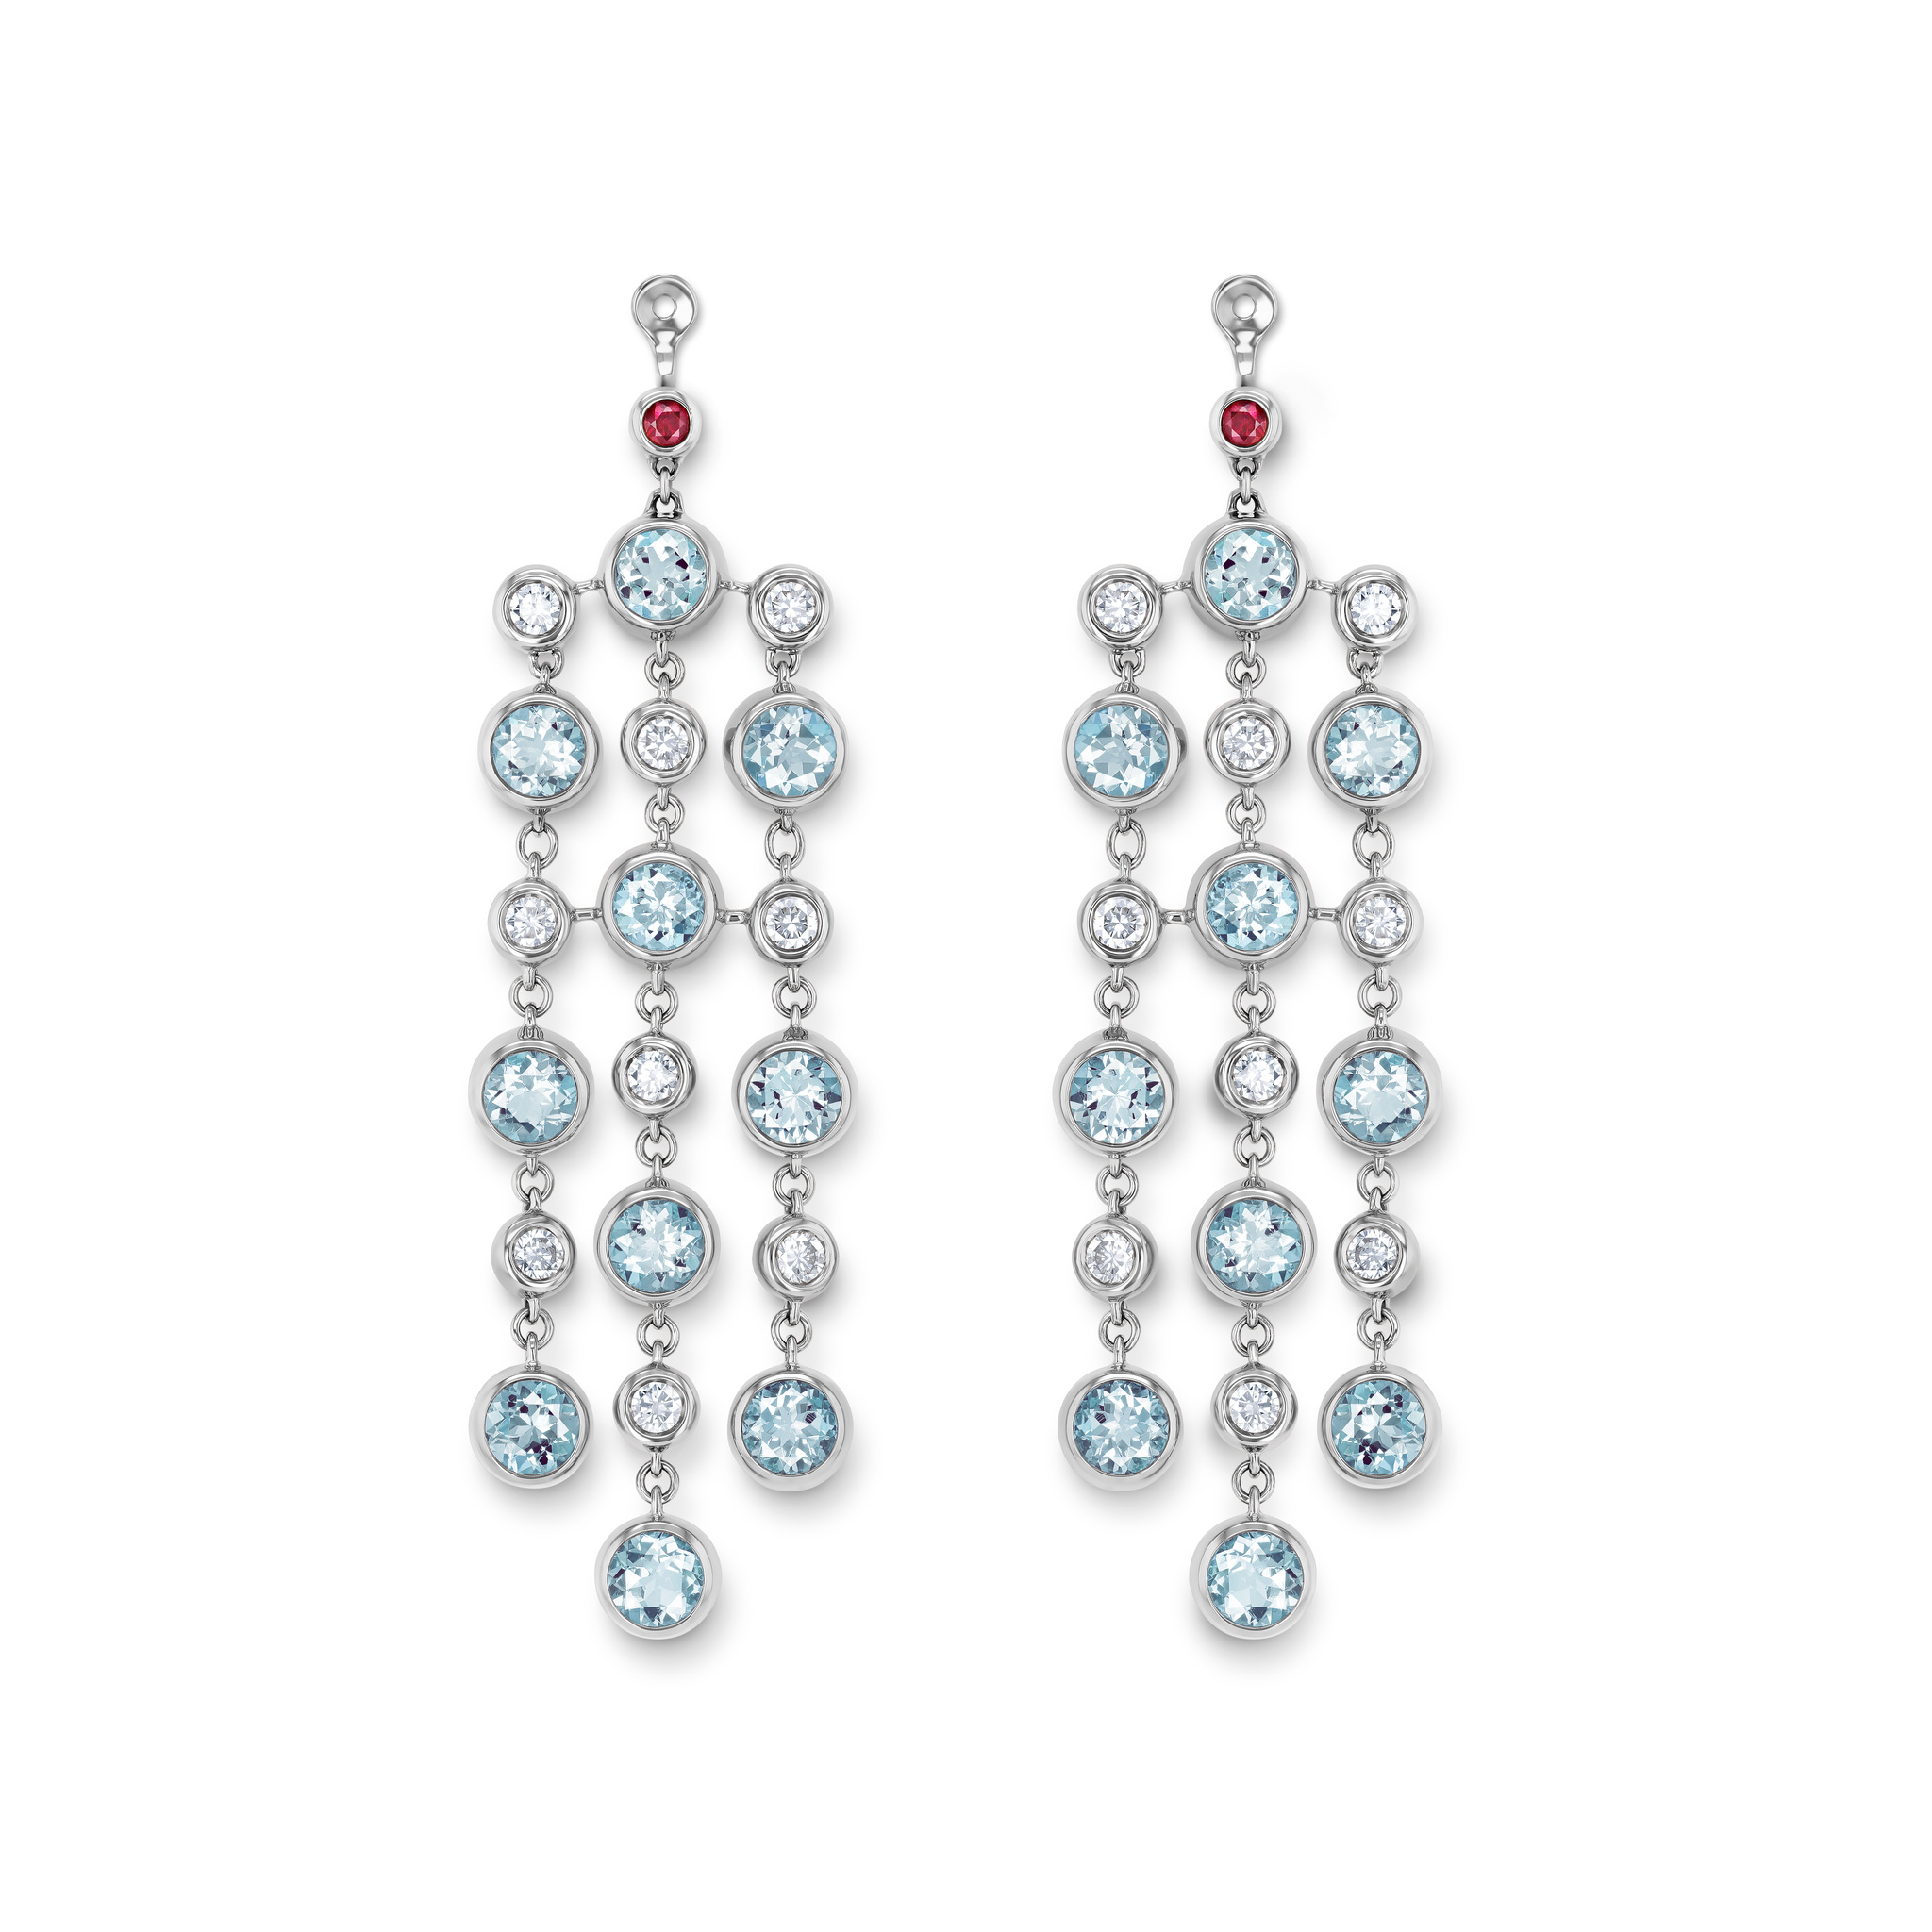 Chandelier earrings with aquamarines